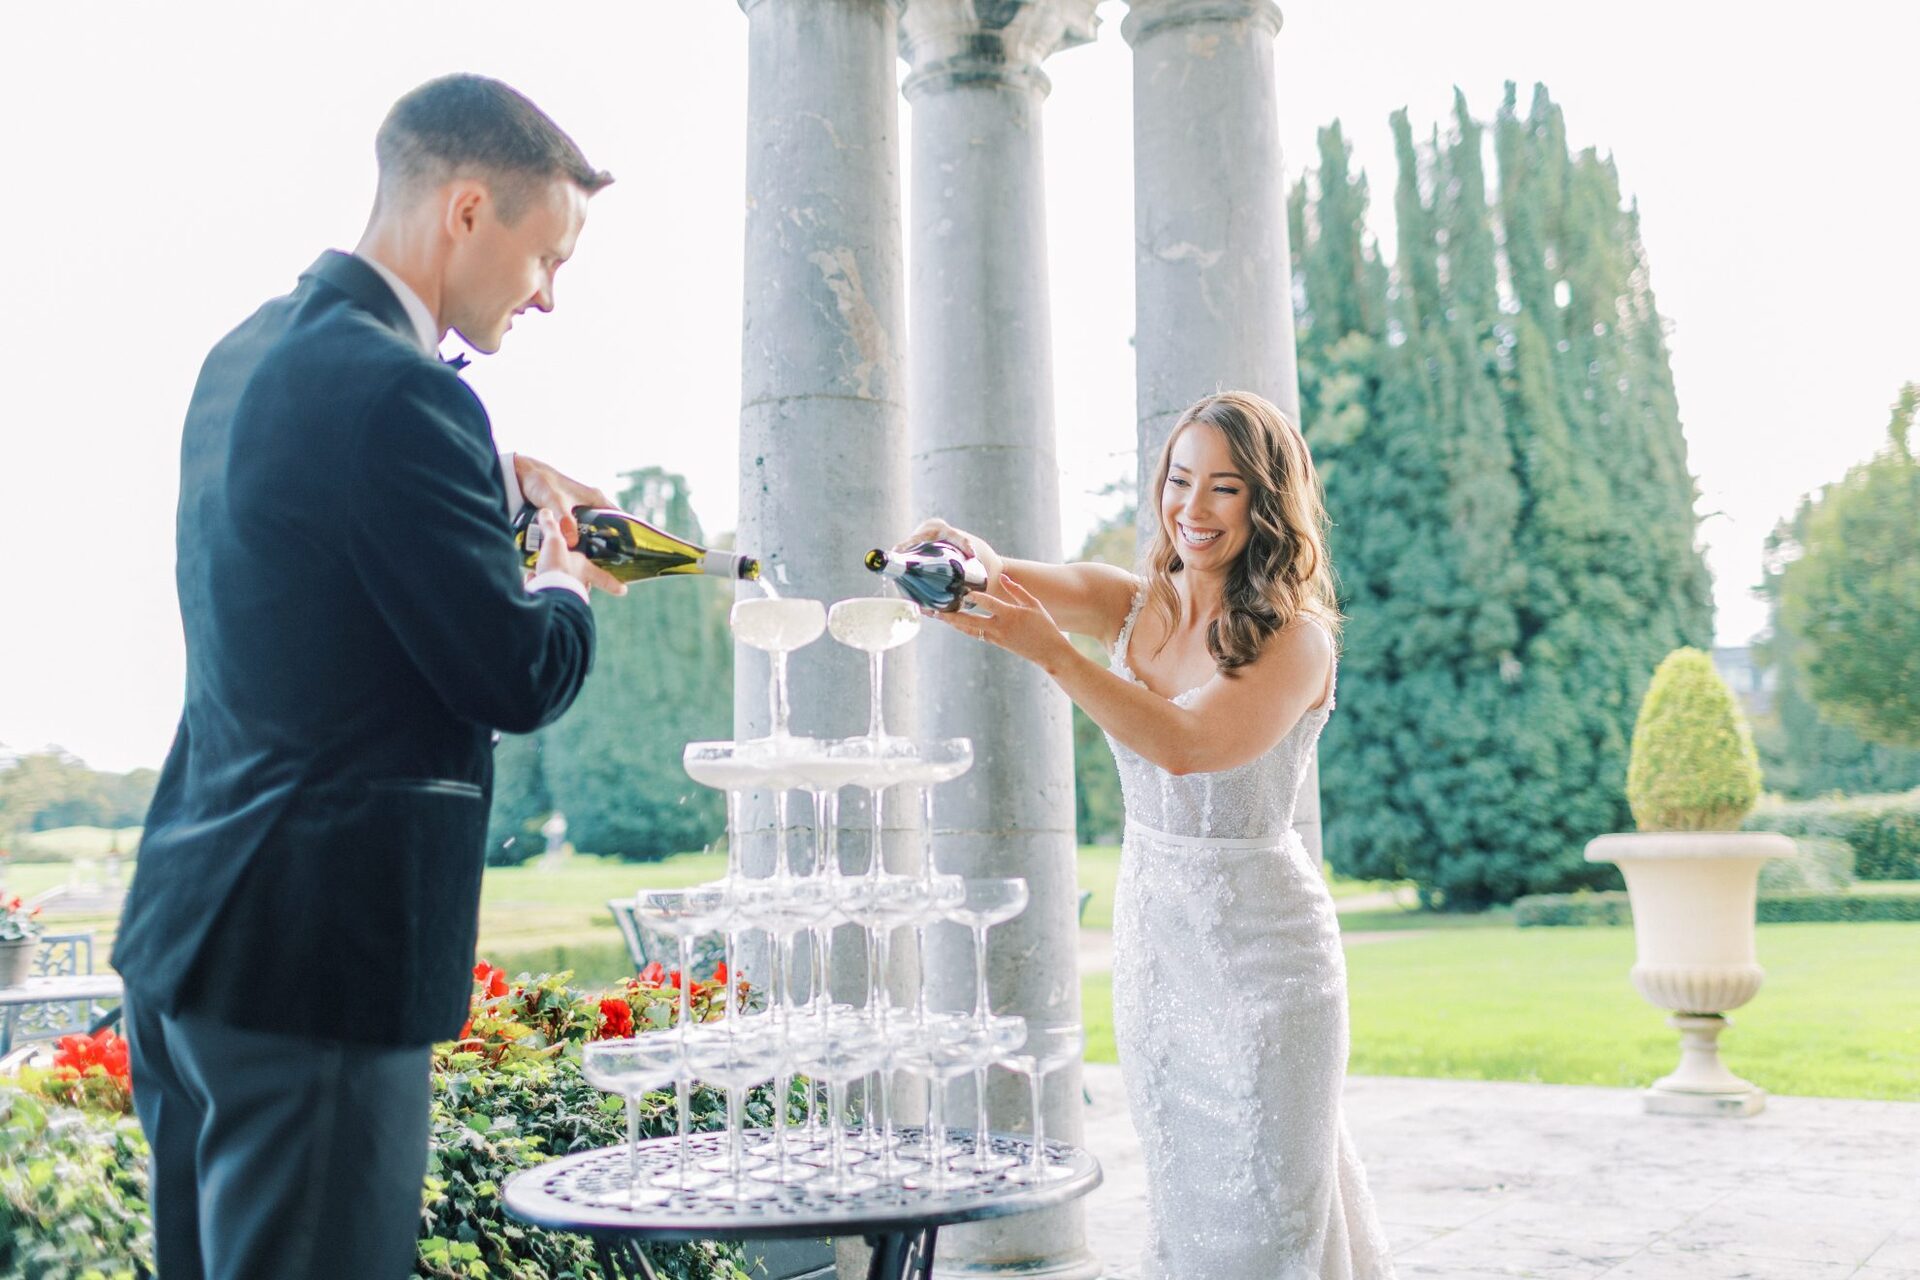 The wedding of Jean & Fintan at Castlemartyr. 
Photographed by Wonder and Magic